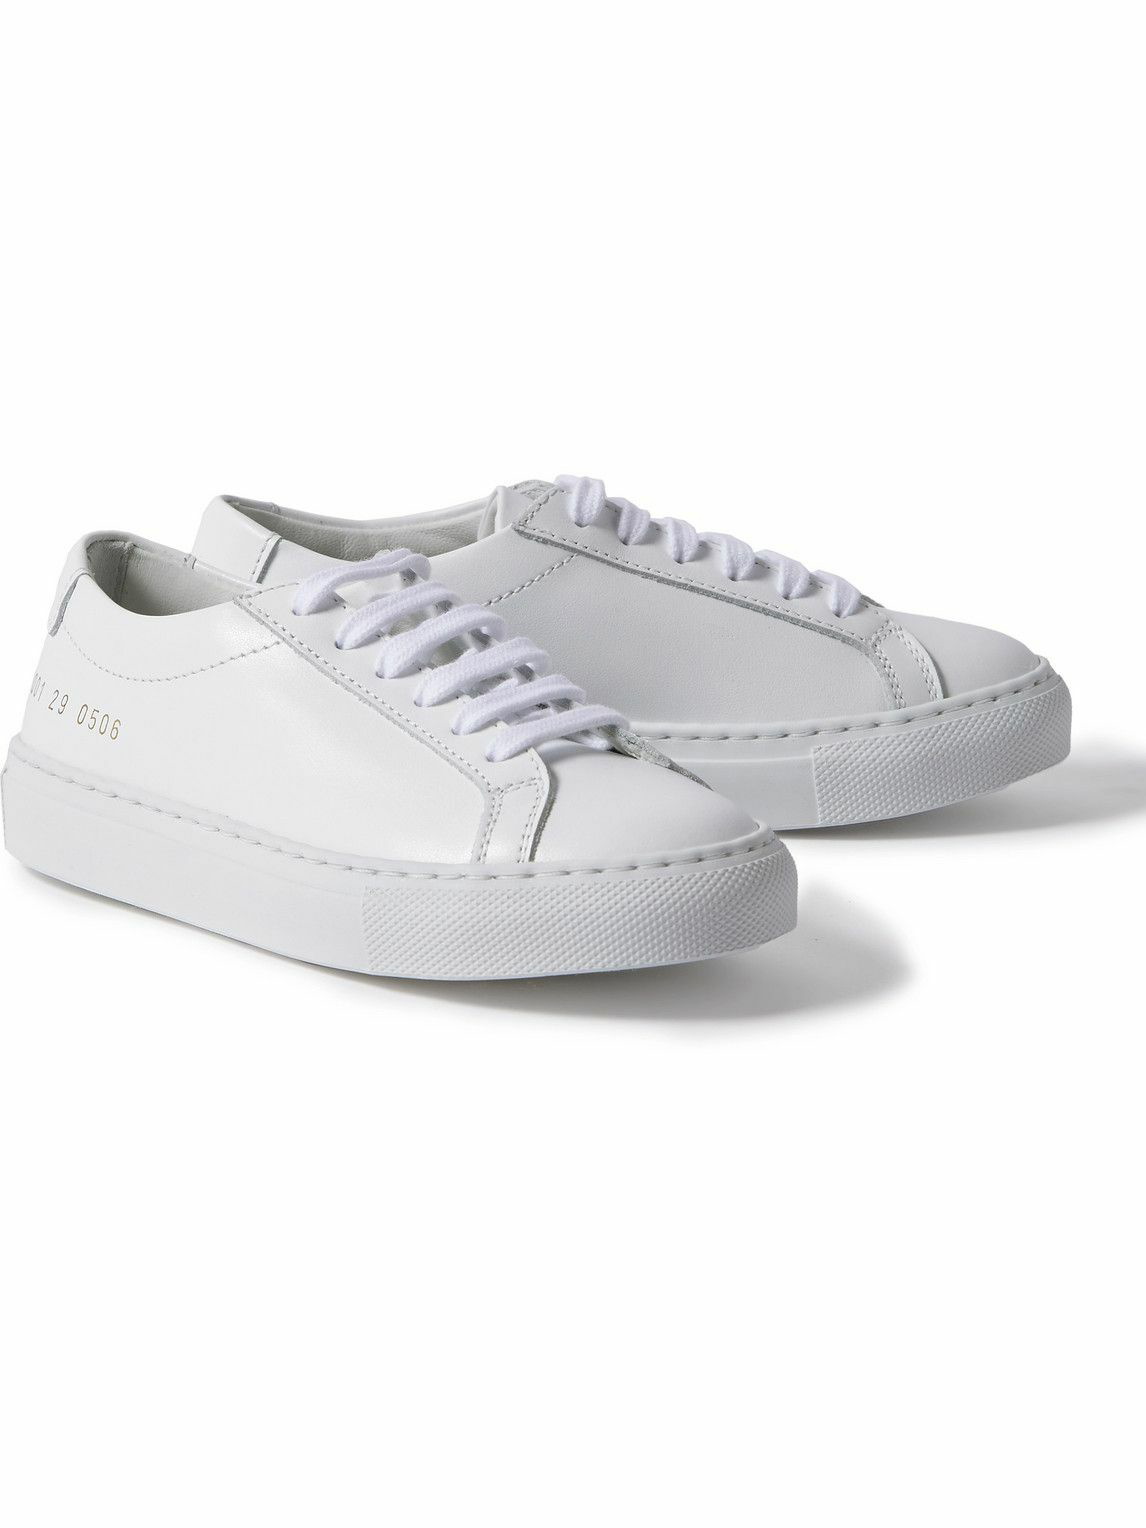 Common Projects Kids - Original Achilles Leather Sneakers - White